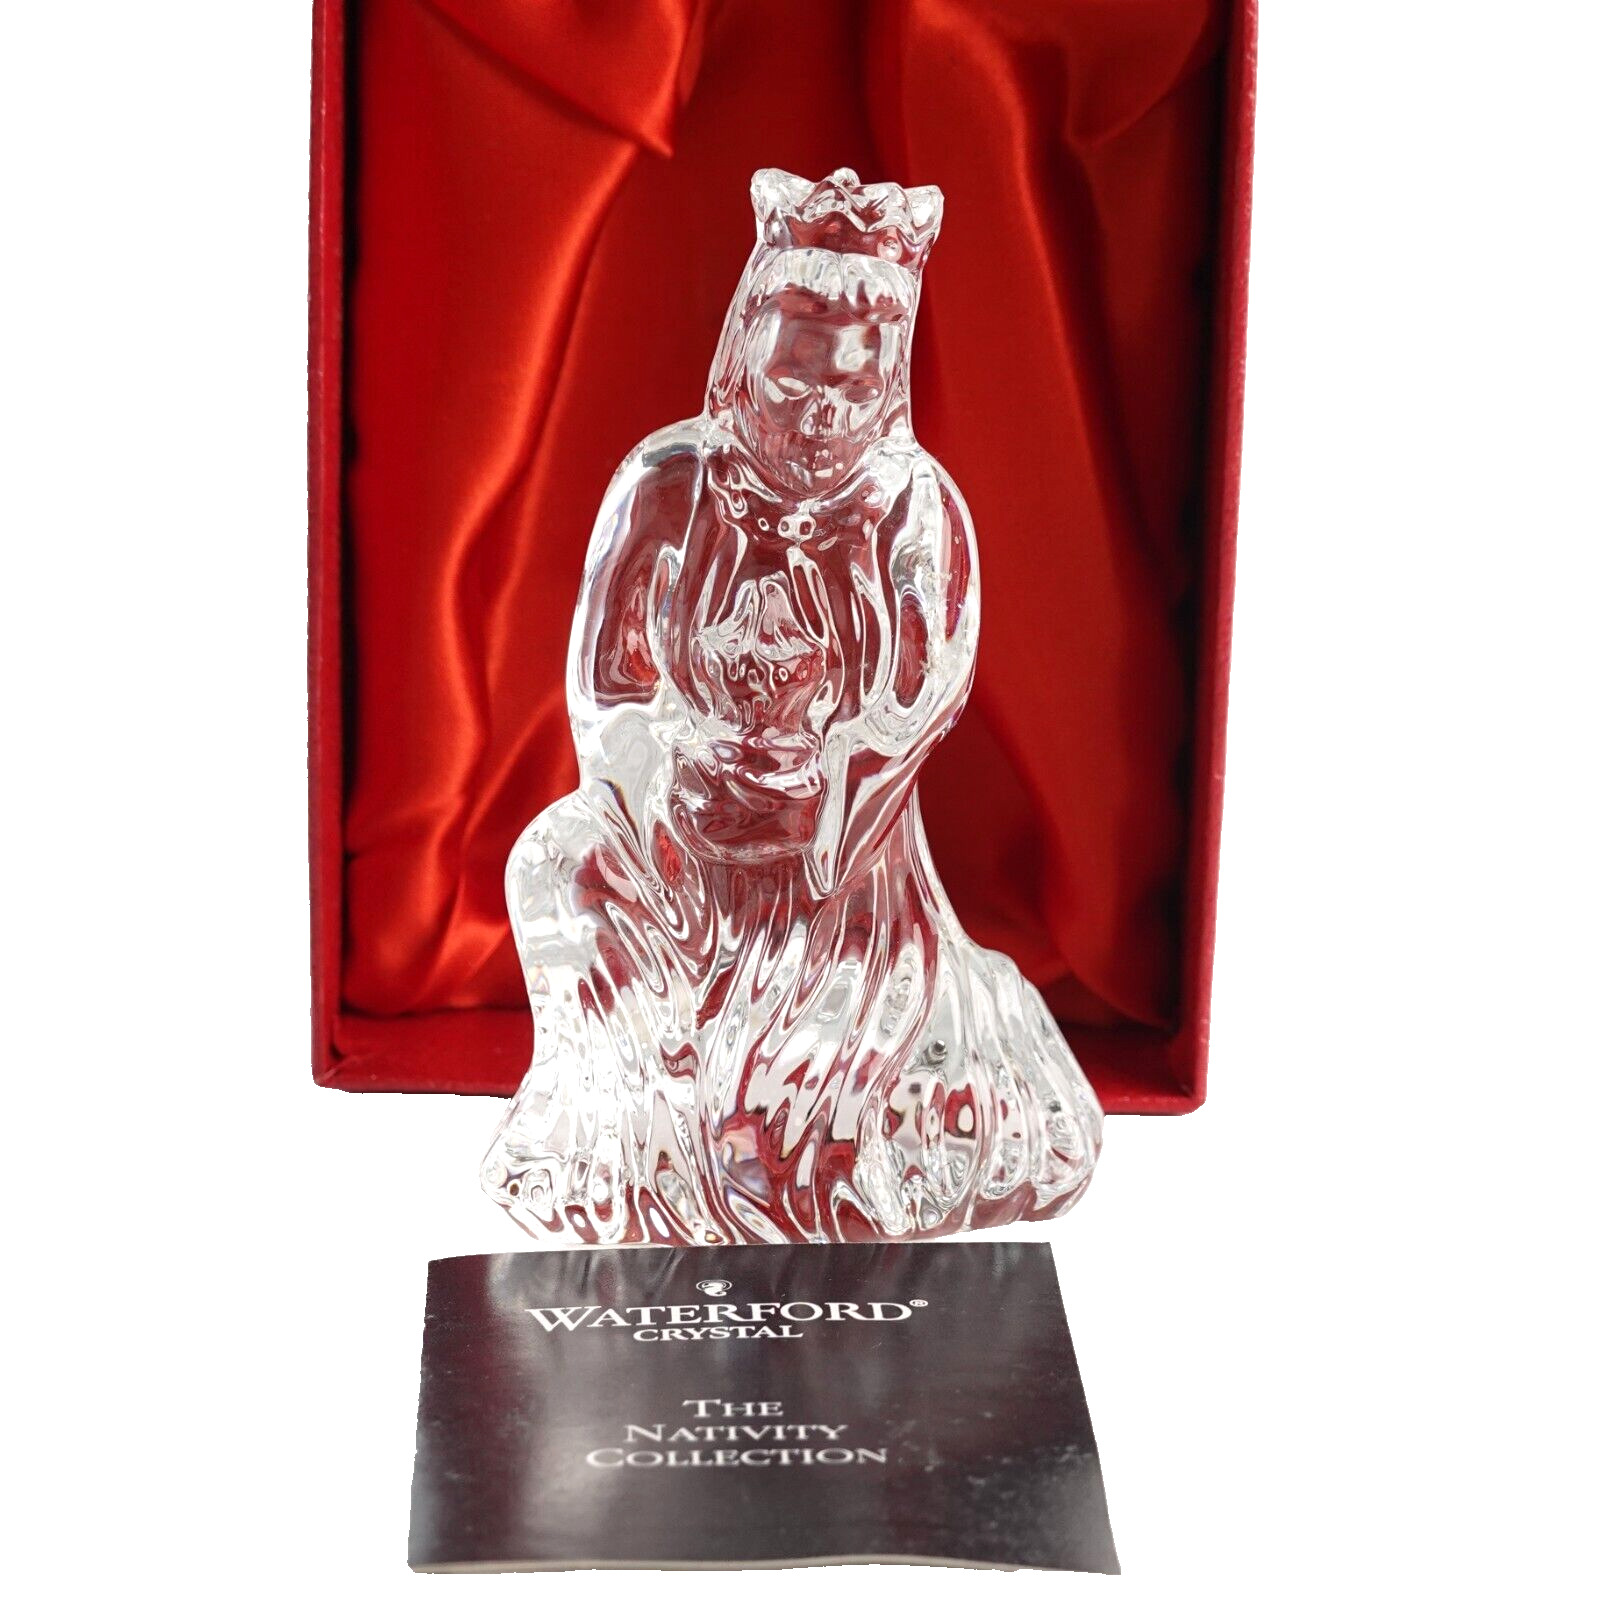 Waterford Crystal Melchior Wiseman Nativity Collection - With Original Red Box